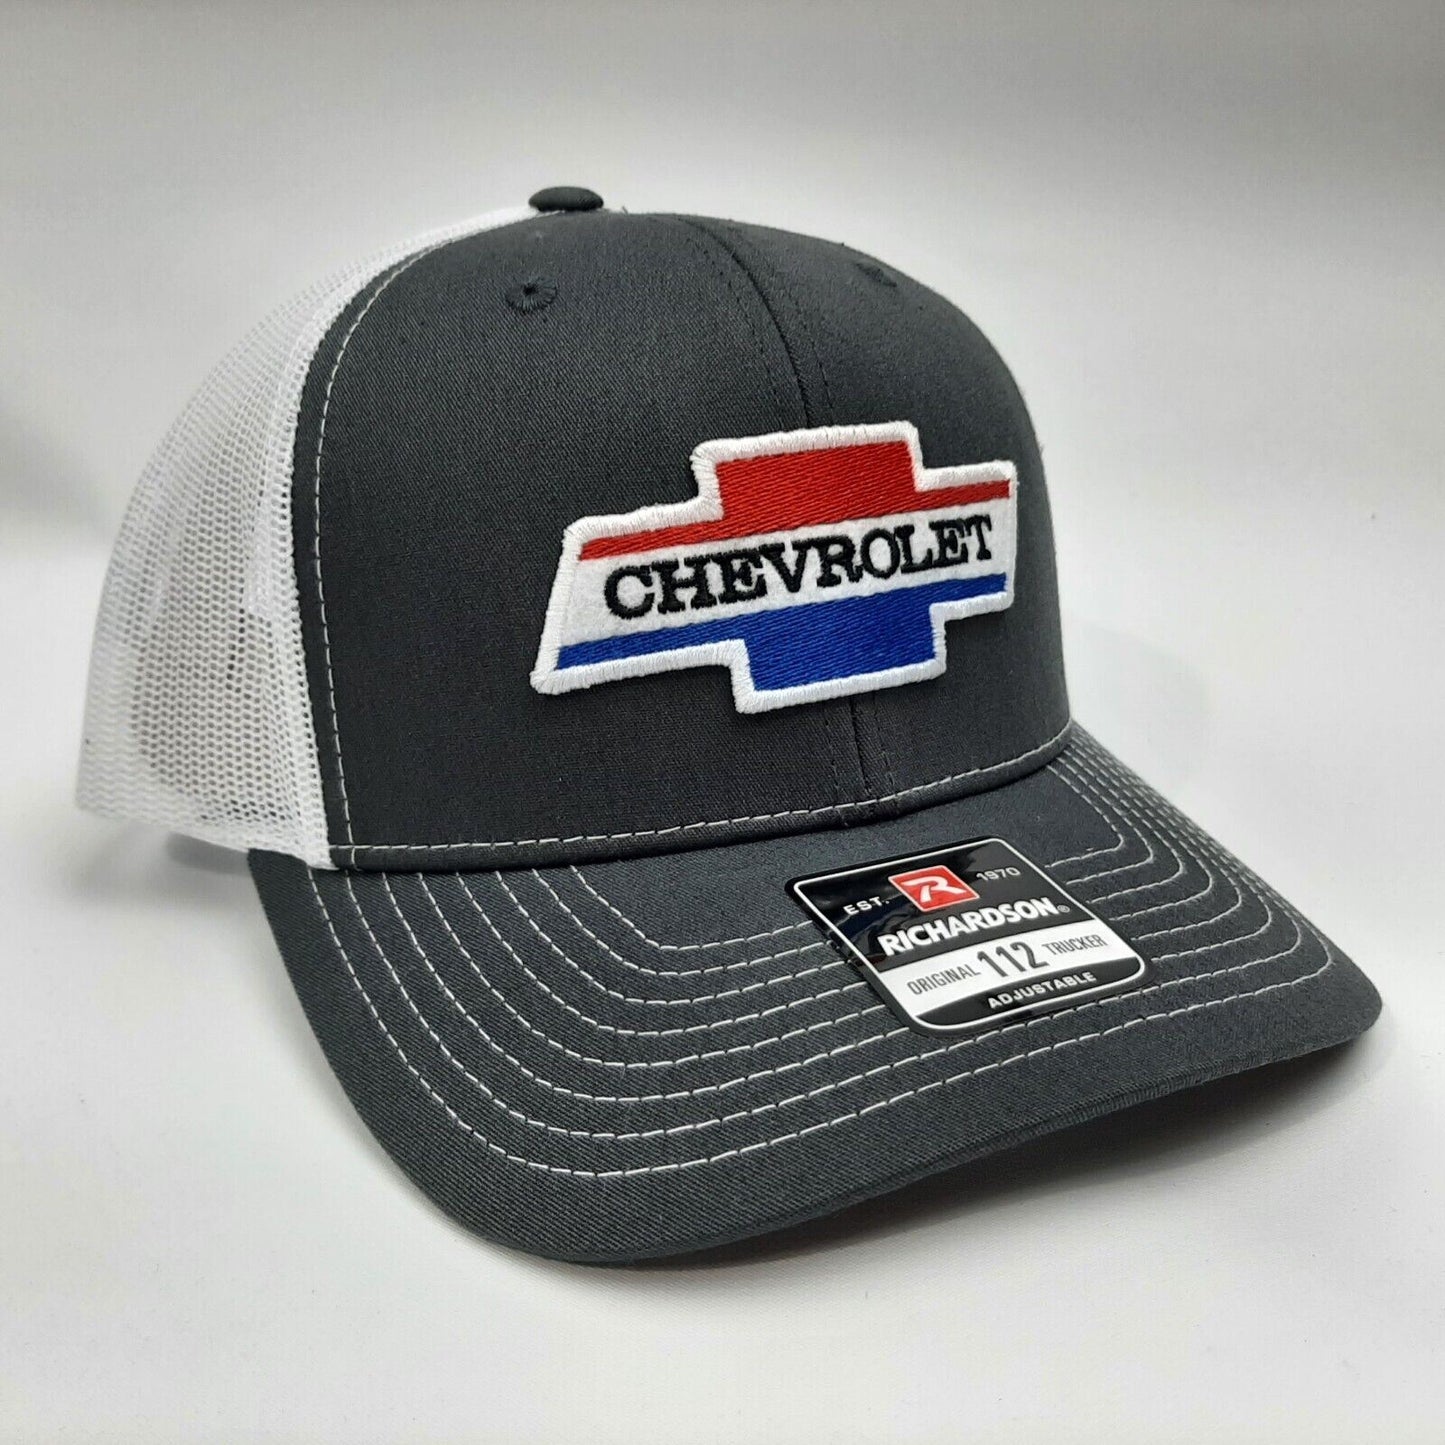 Chevrolet Chevy Embroidered Patch Richardson 112 Trucker Mesh Snapback Cap Hat Gray & White